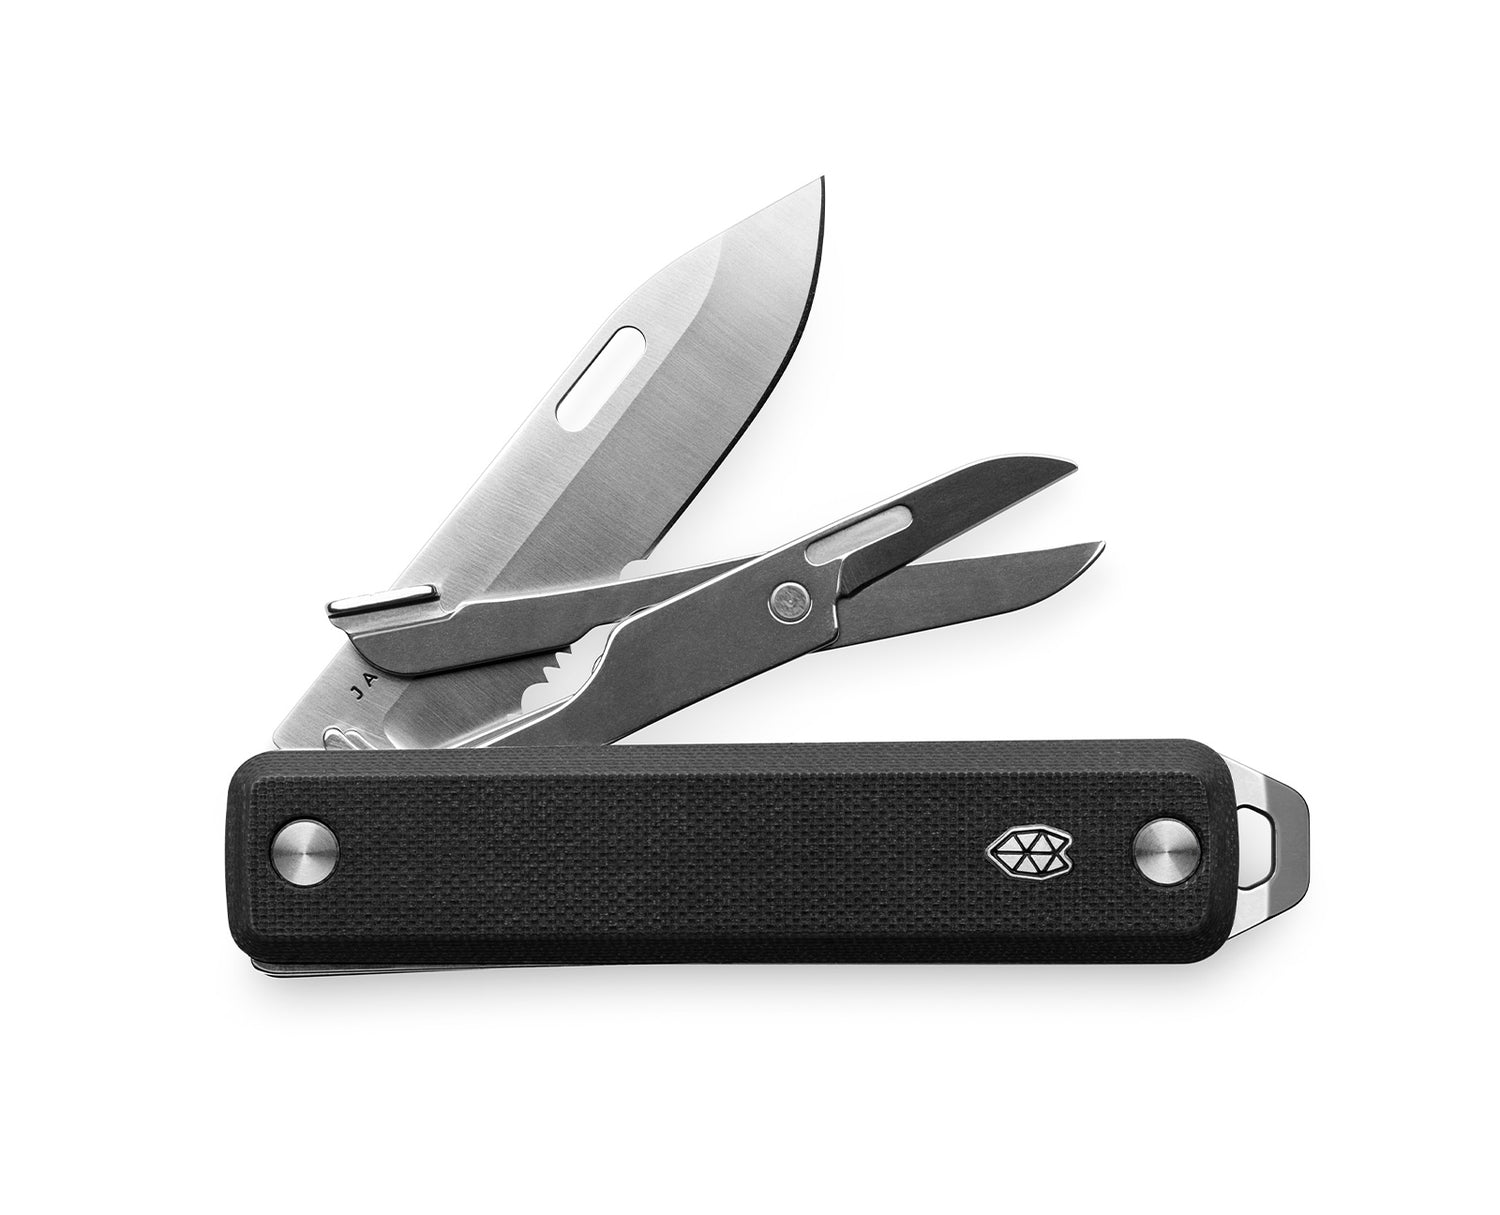  Inc. > Knife Sheath Clips > Spring stainless steel